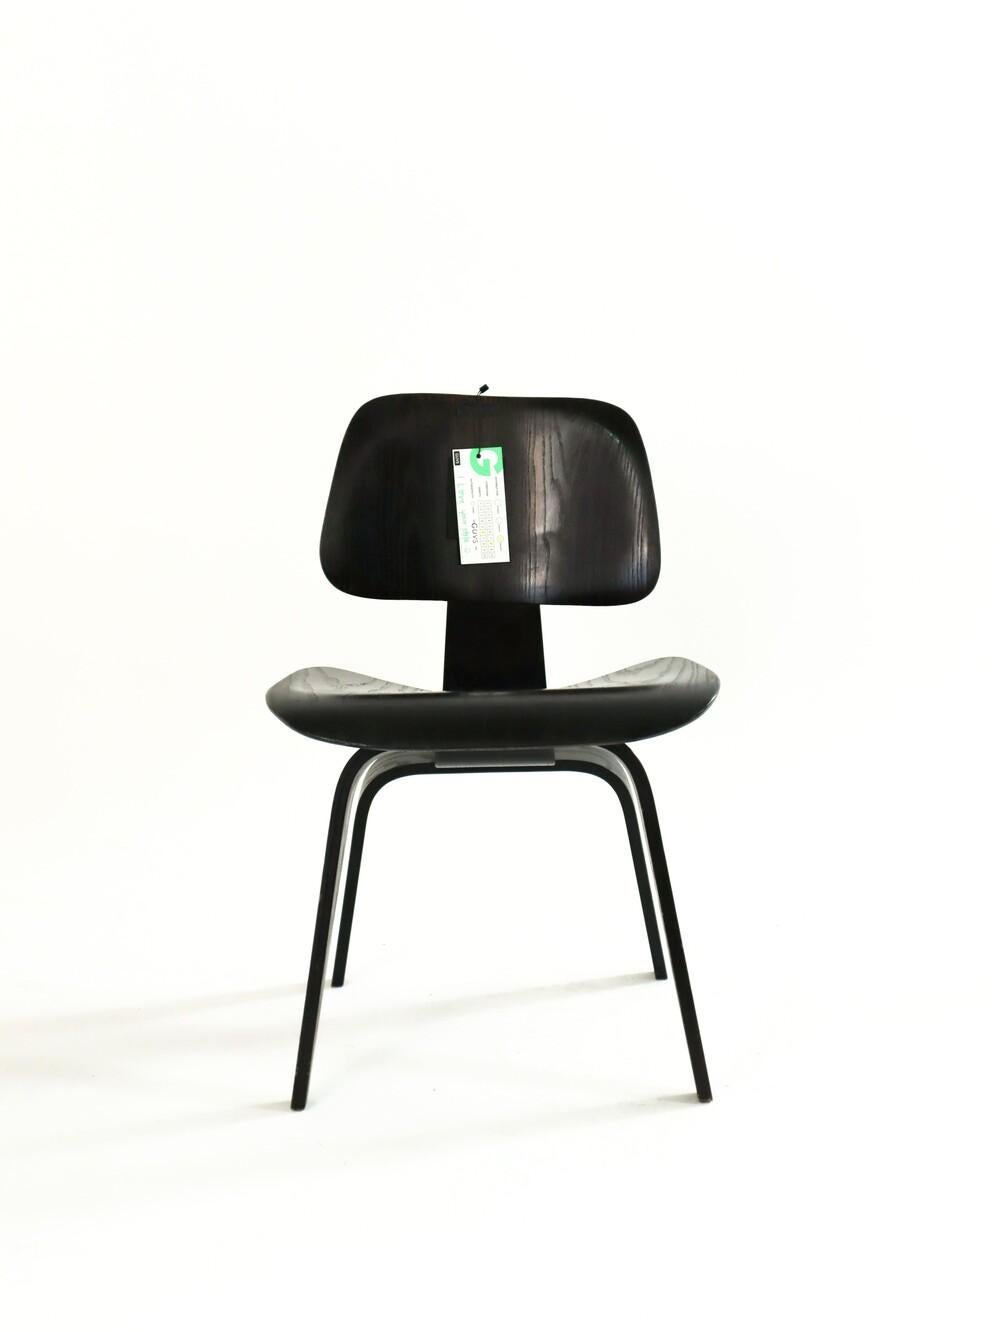 Early Evans Version Eames DCW. This collector's piece is labeled underneath and has the large single back mount. 

